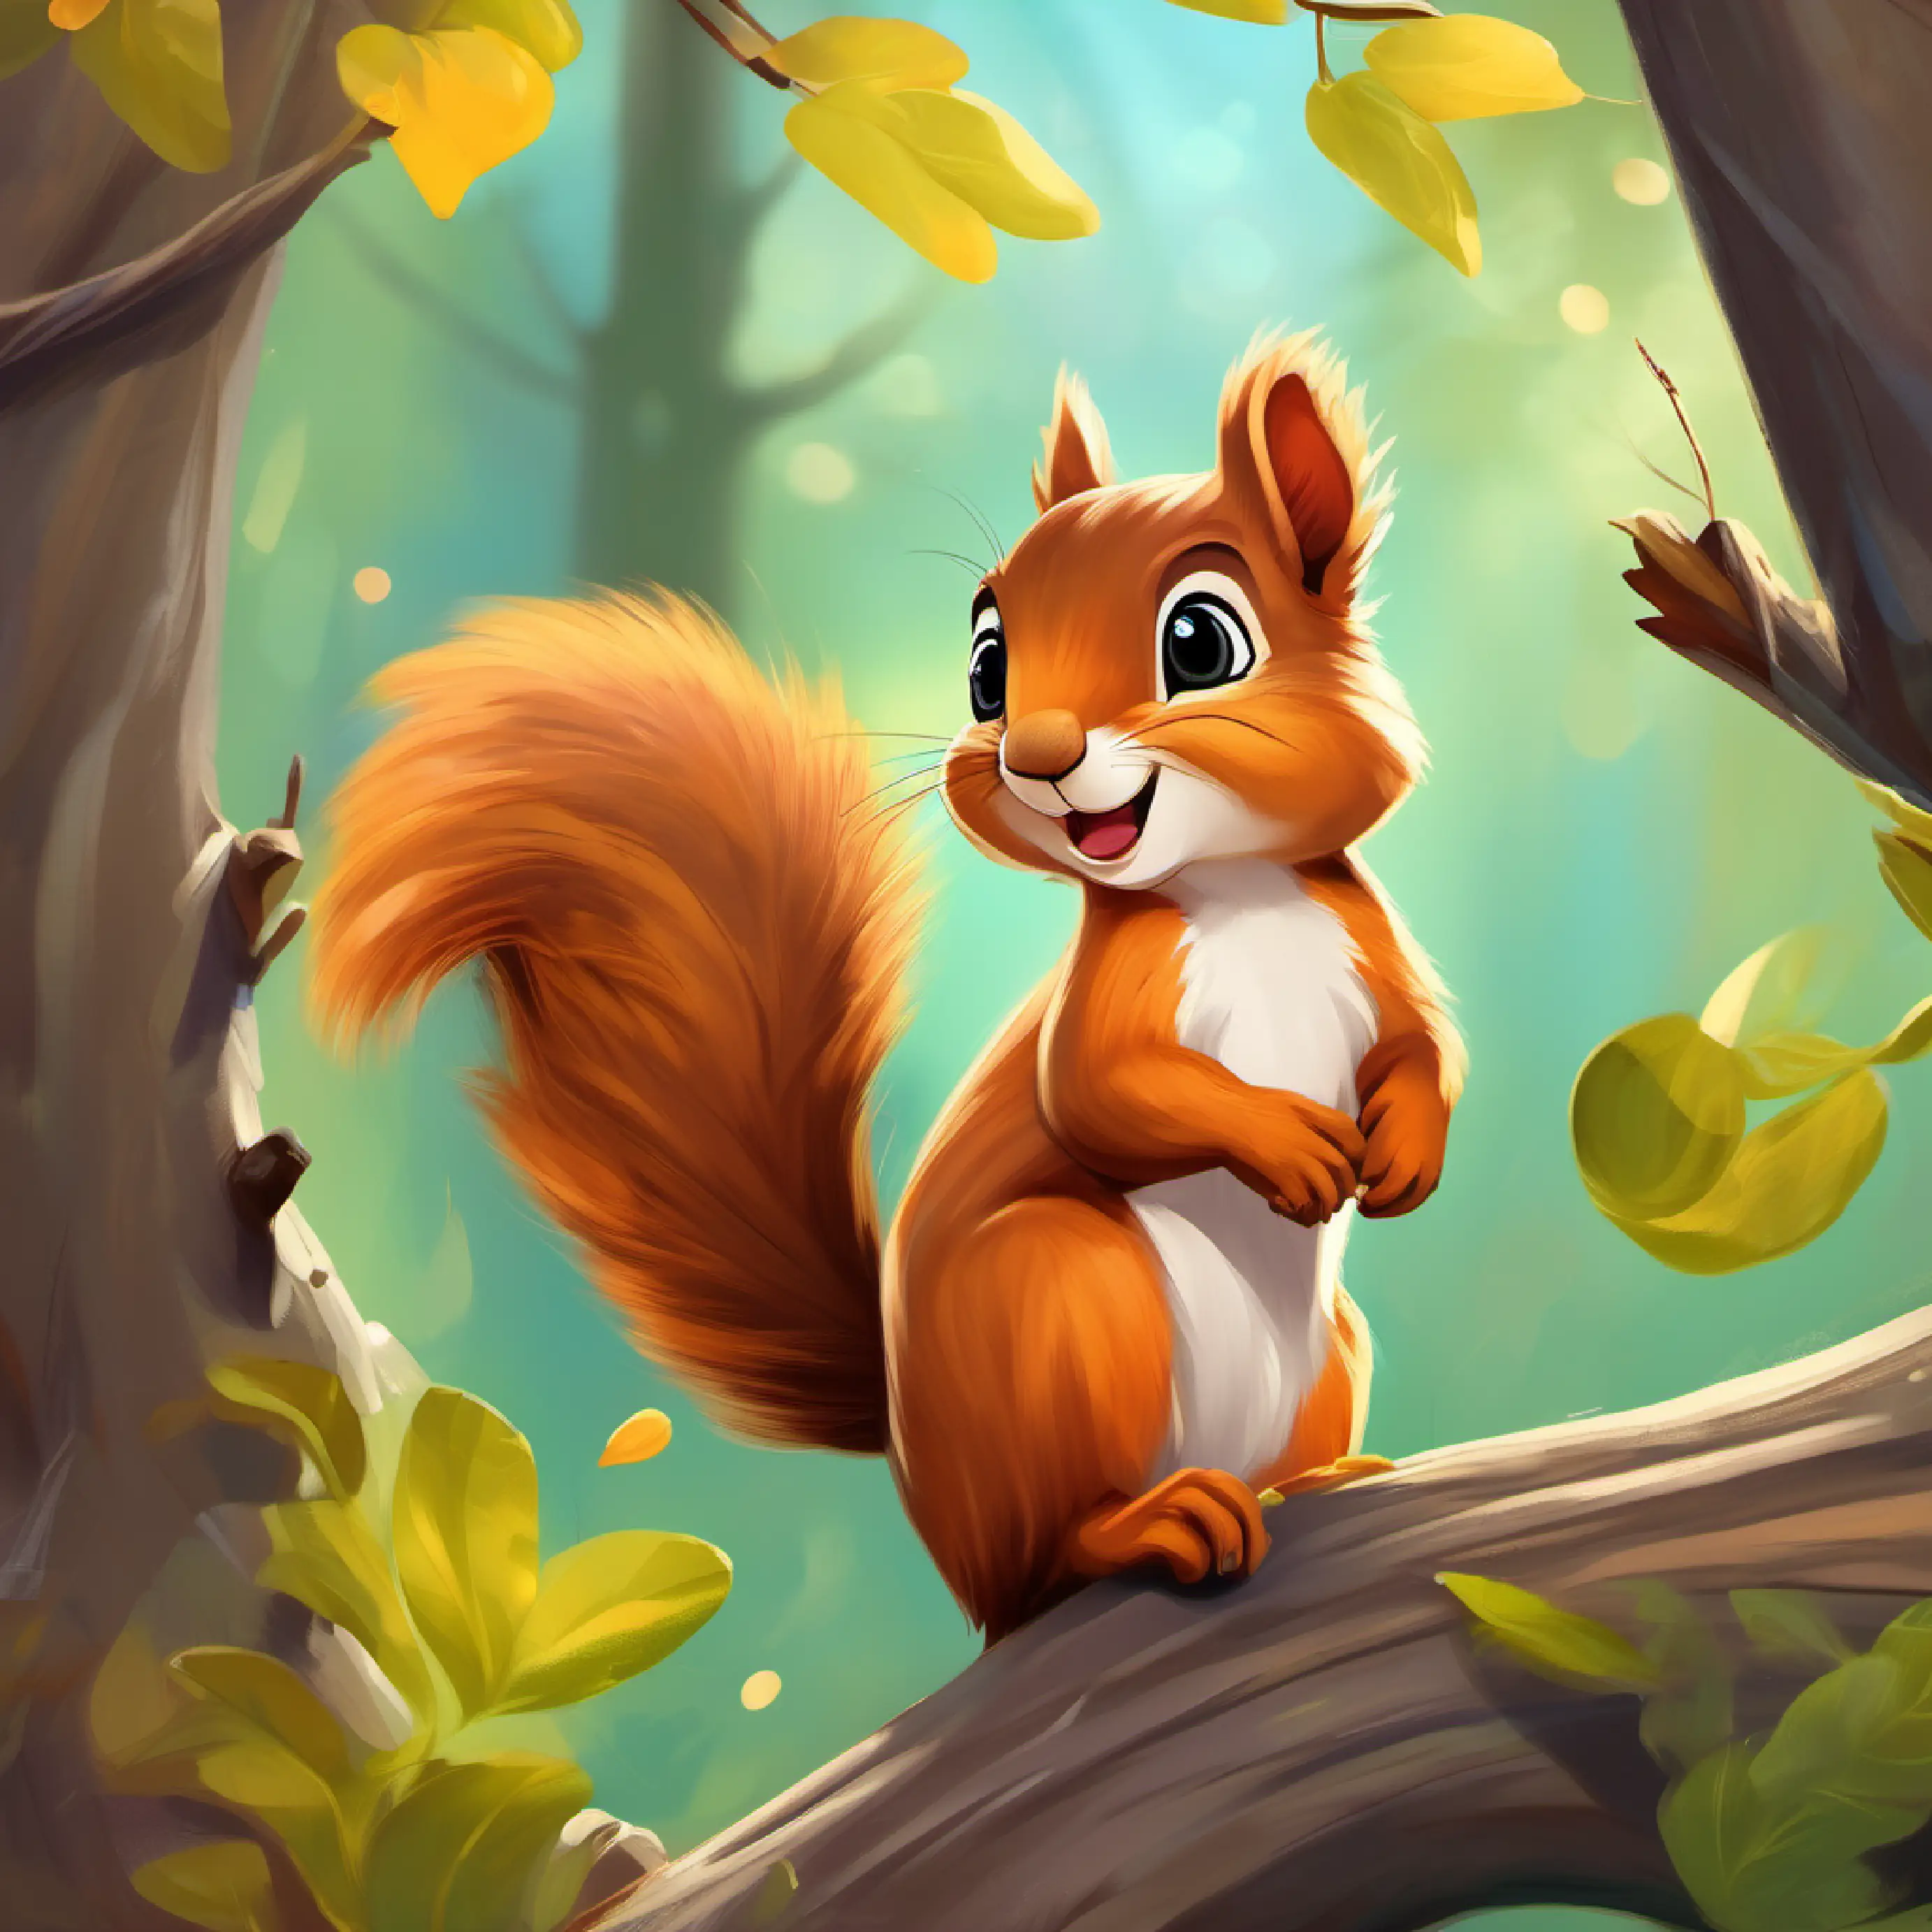 Restless Young, playful squirrel with a bushy tail and bright, curious eyes played around, ignoring the tree’s wisdom